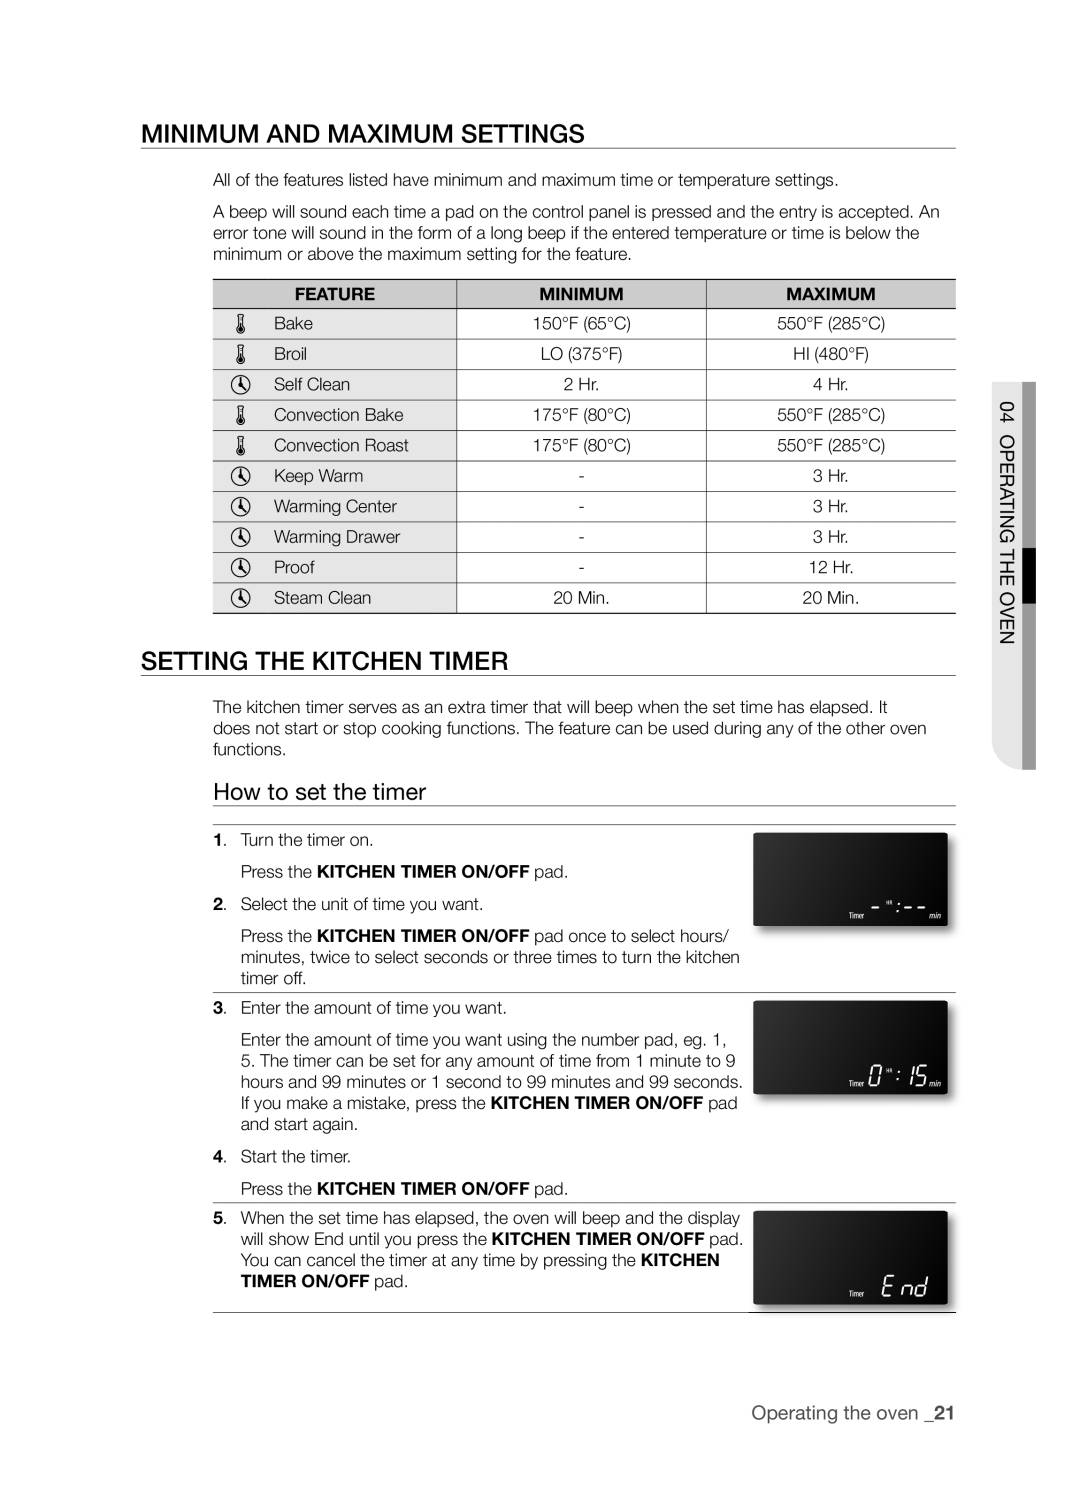 Samsung FTQ386LWUX Minimum And Maximum Settings, Setting The Kitchen Timer, How to set the timer, Operating The Oven 